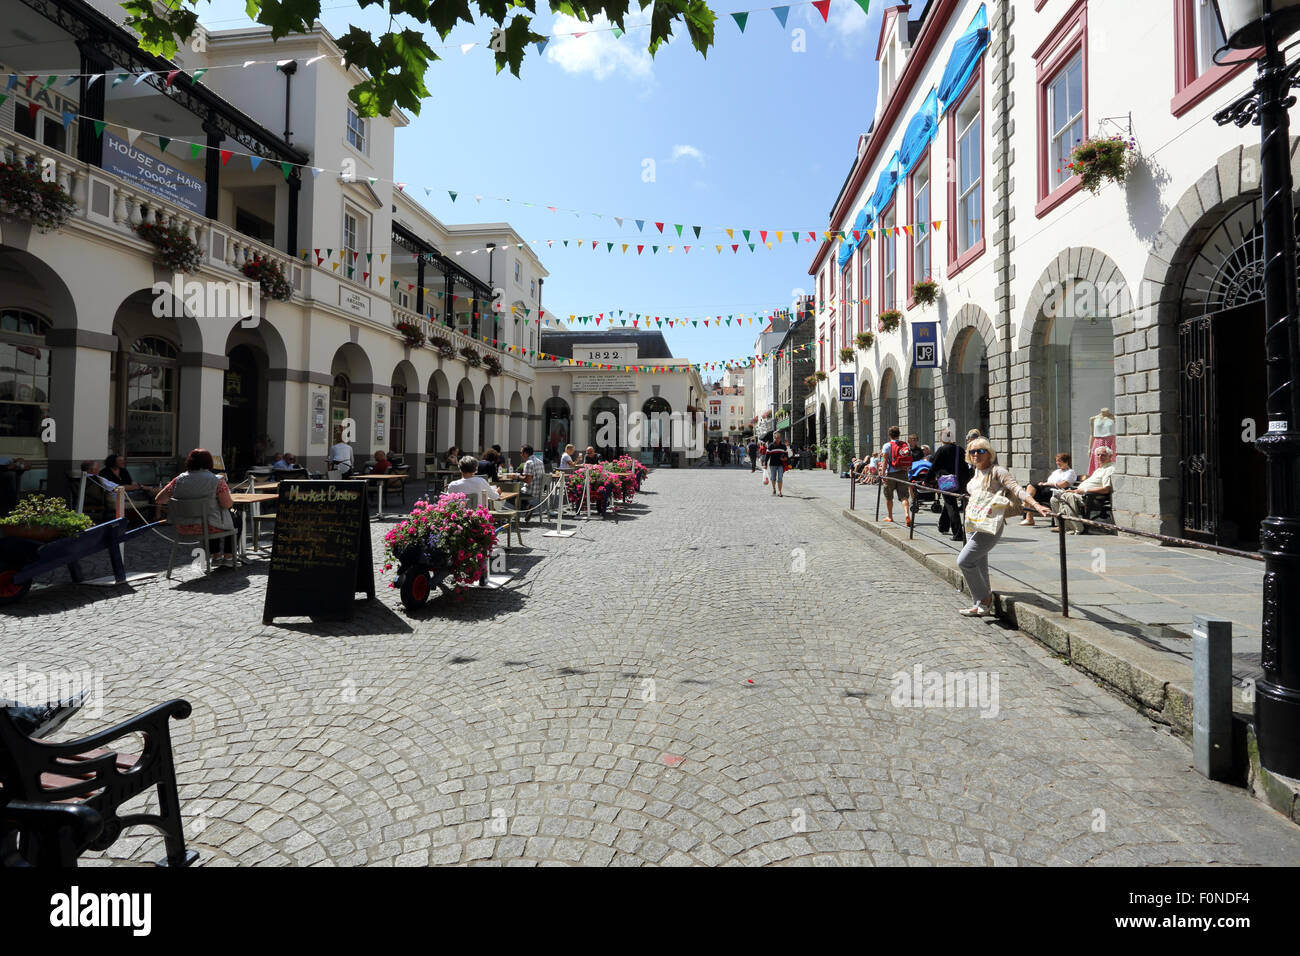 Market square in St. Peter Port, Guernsey. It is a sunny day, and people are sitting outside at cafés, and walking along. Stock Photo